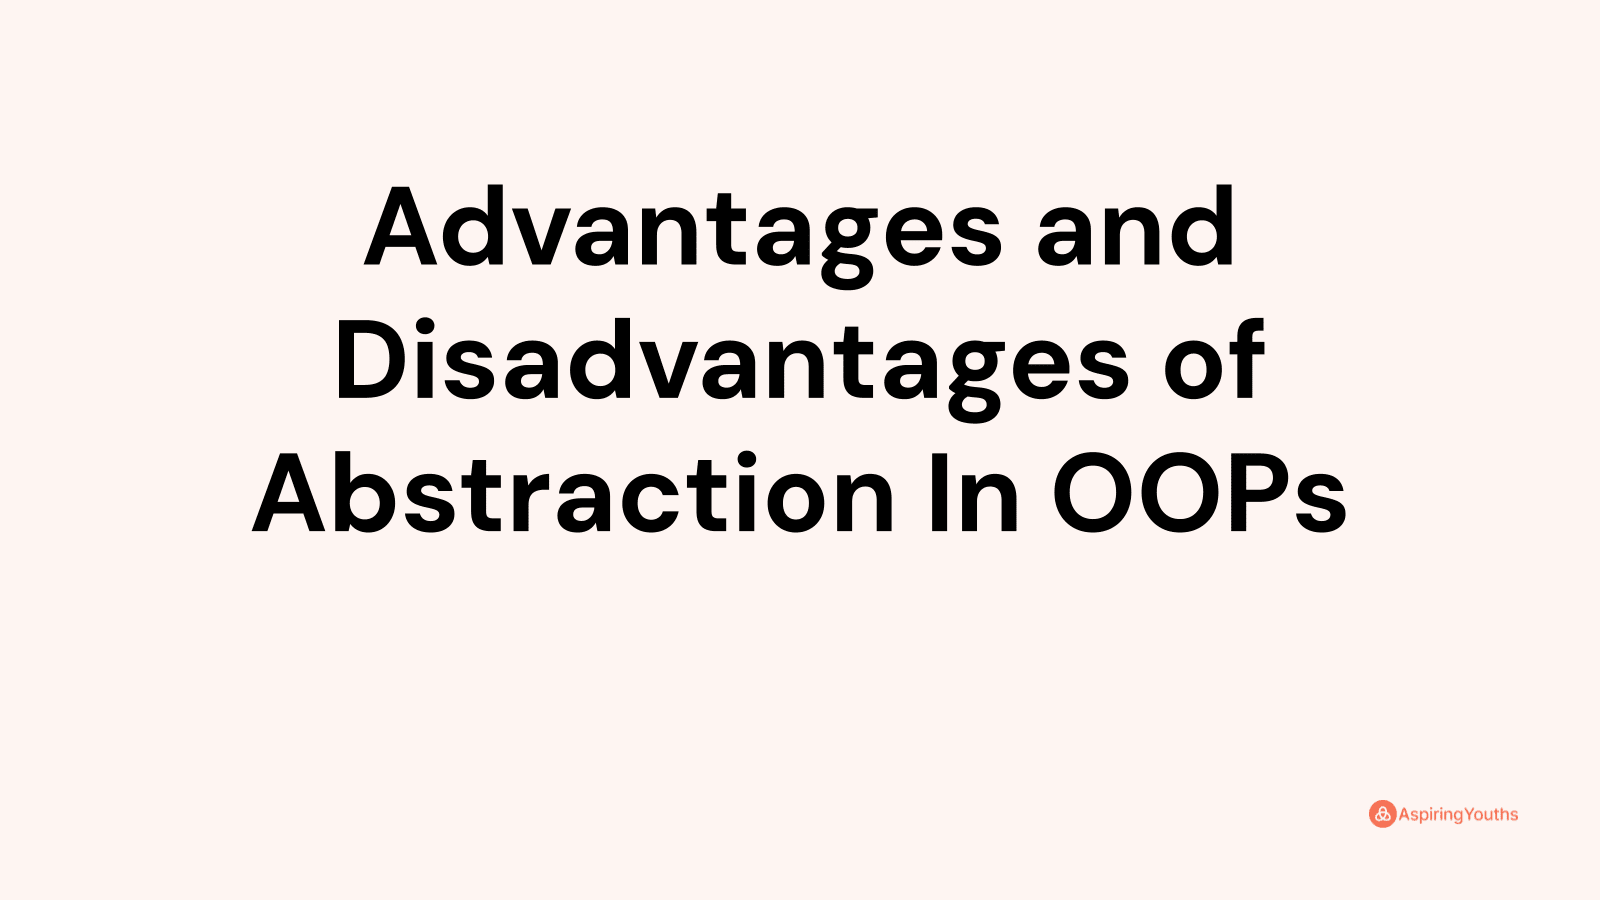 Advantages and disadvantages of Abstraction In OOPs